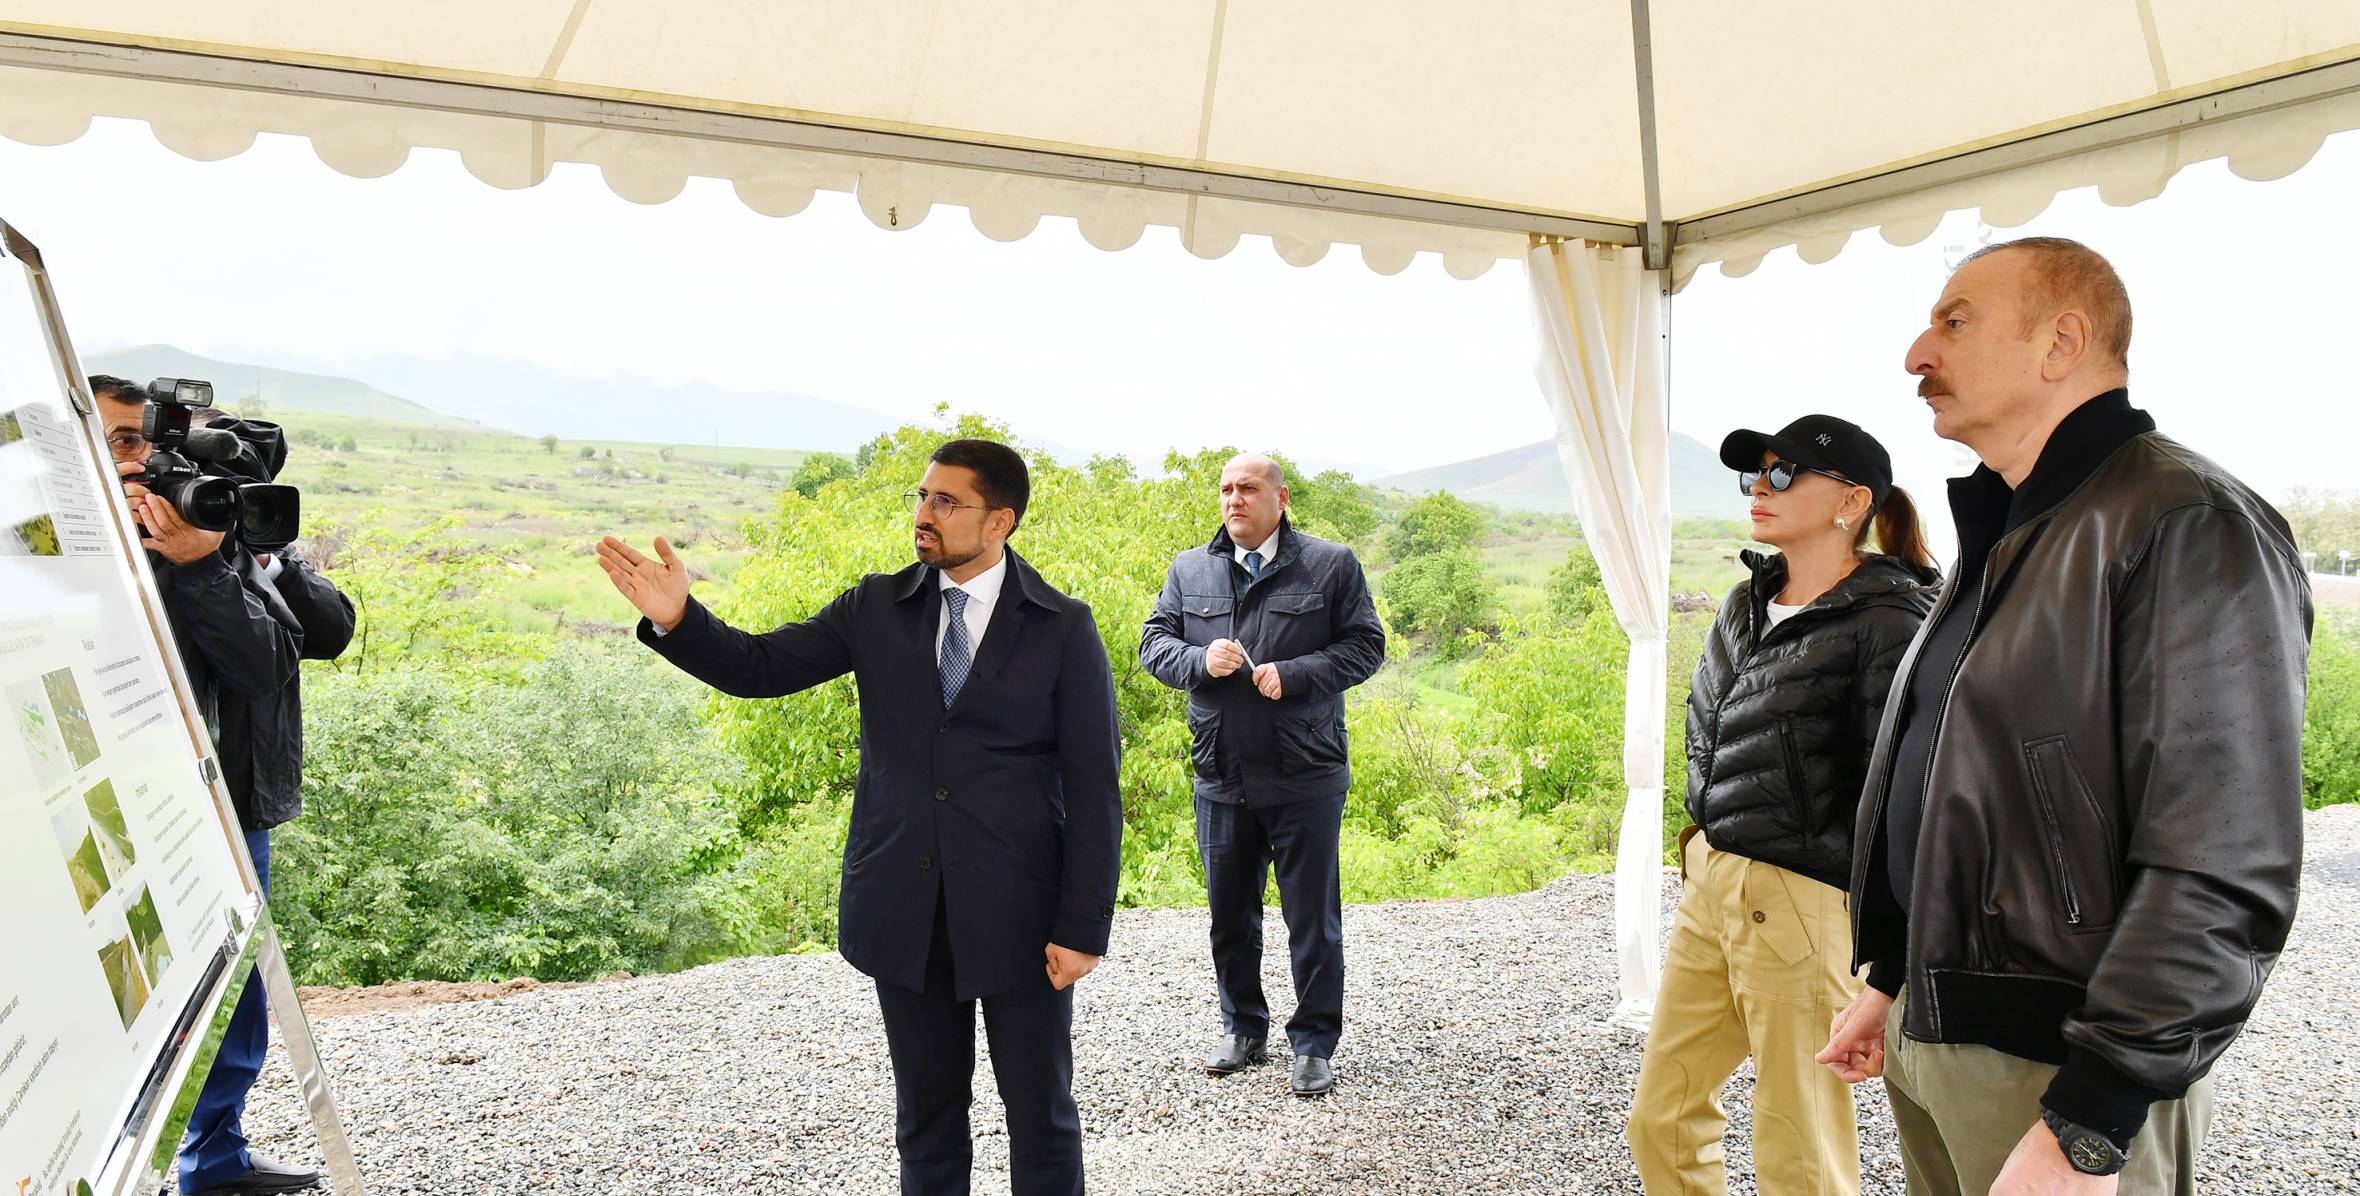 Ilham Aliyev and First Lady Mehriban Aliyeva planted trees in a park to be created in Fuzuli city